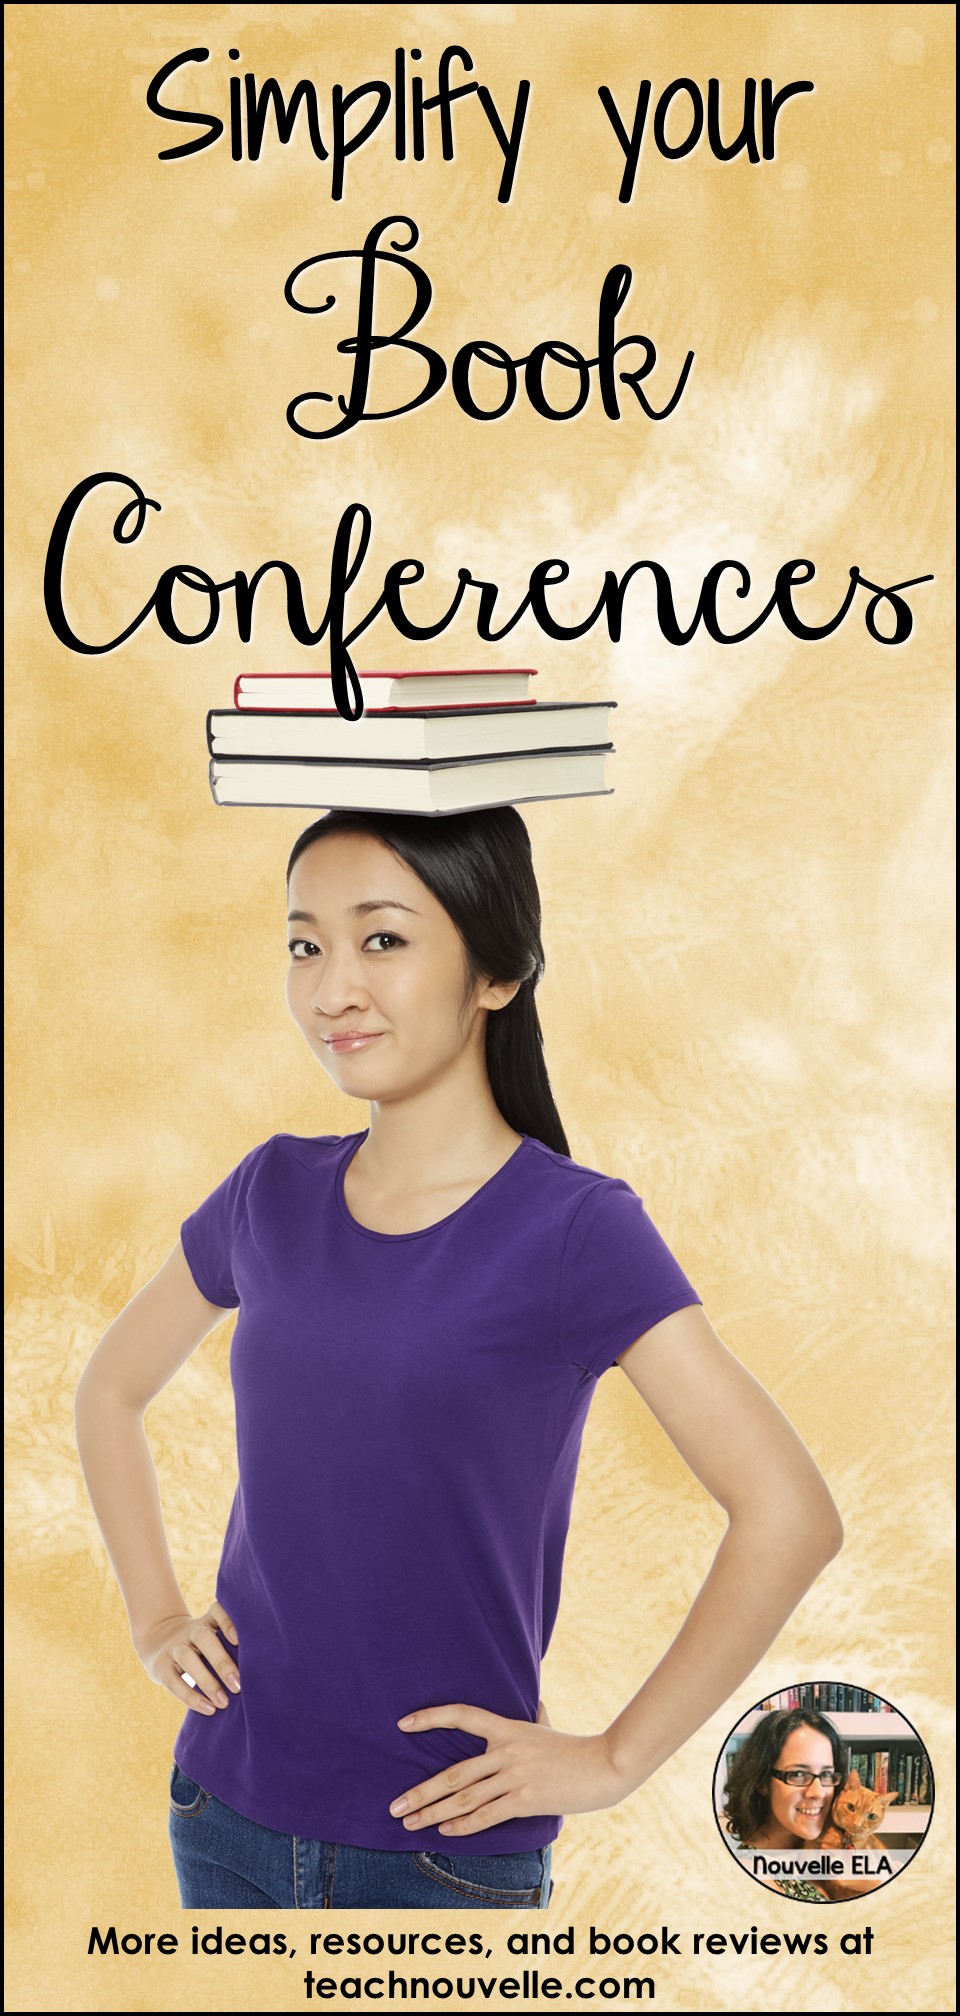 Book conferences are a great way to review students’ independent reading without a huge grading burden on the teacher. Check out these tips for quick and enriching book conferences. Blog post by teachnouvelle.com.